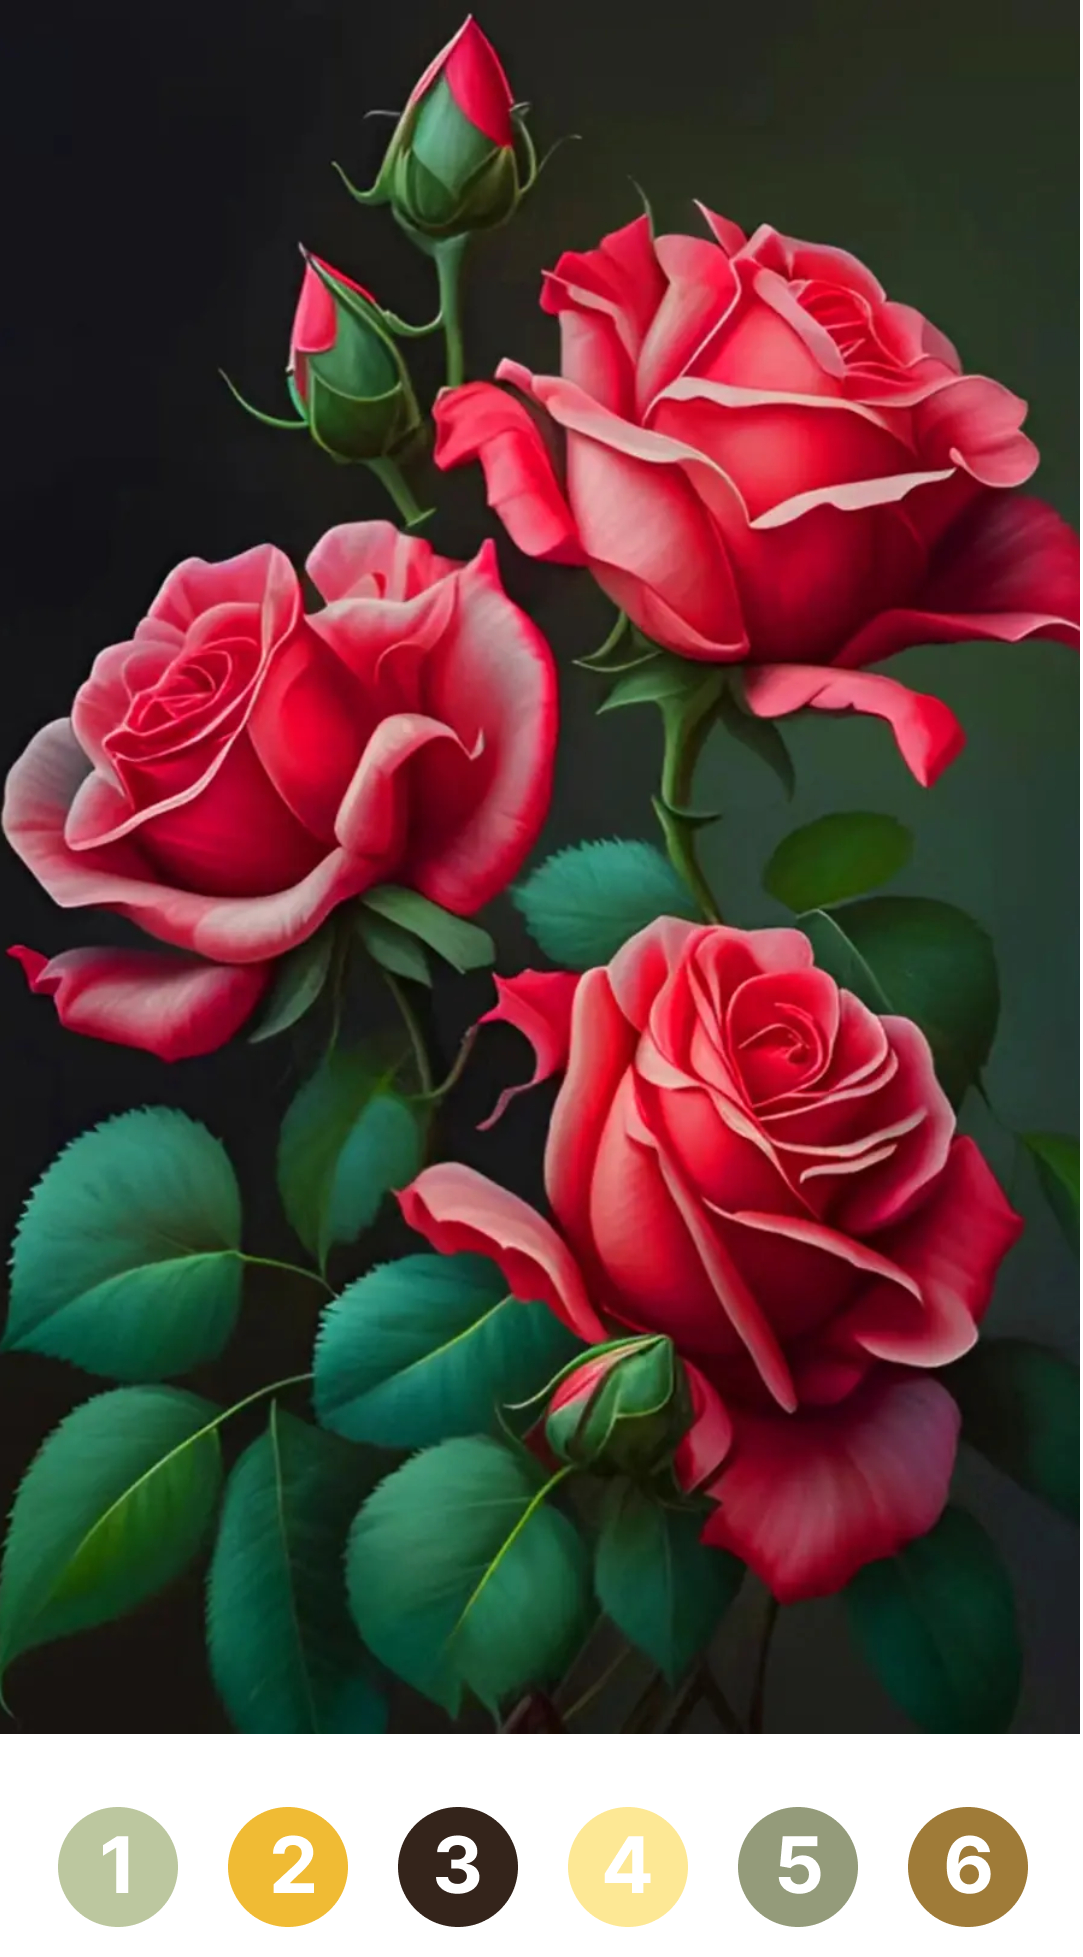 Rose Paint Coloring By Number 게임 스크린 샷